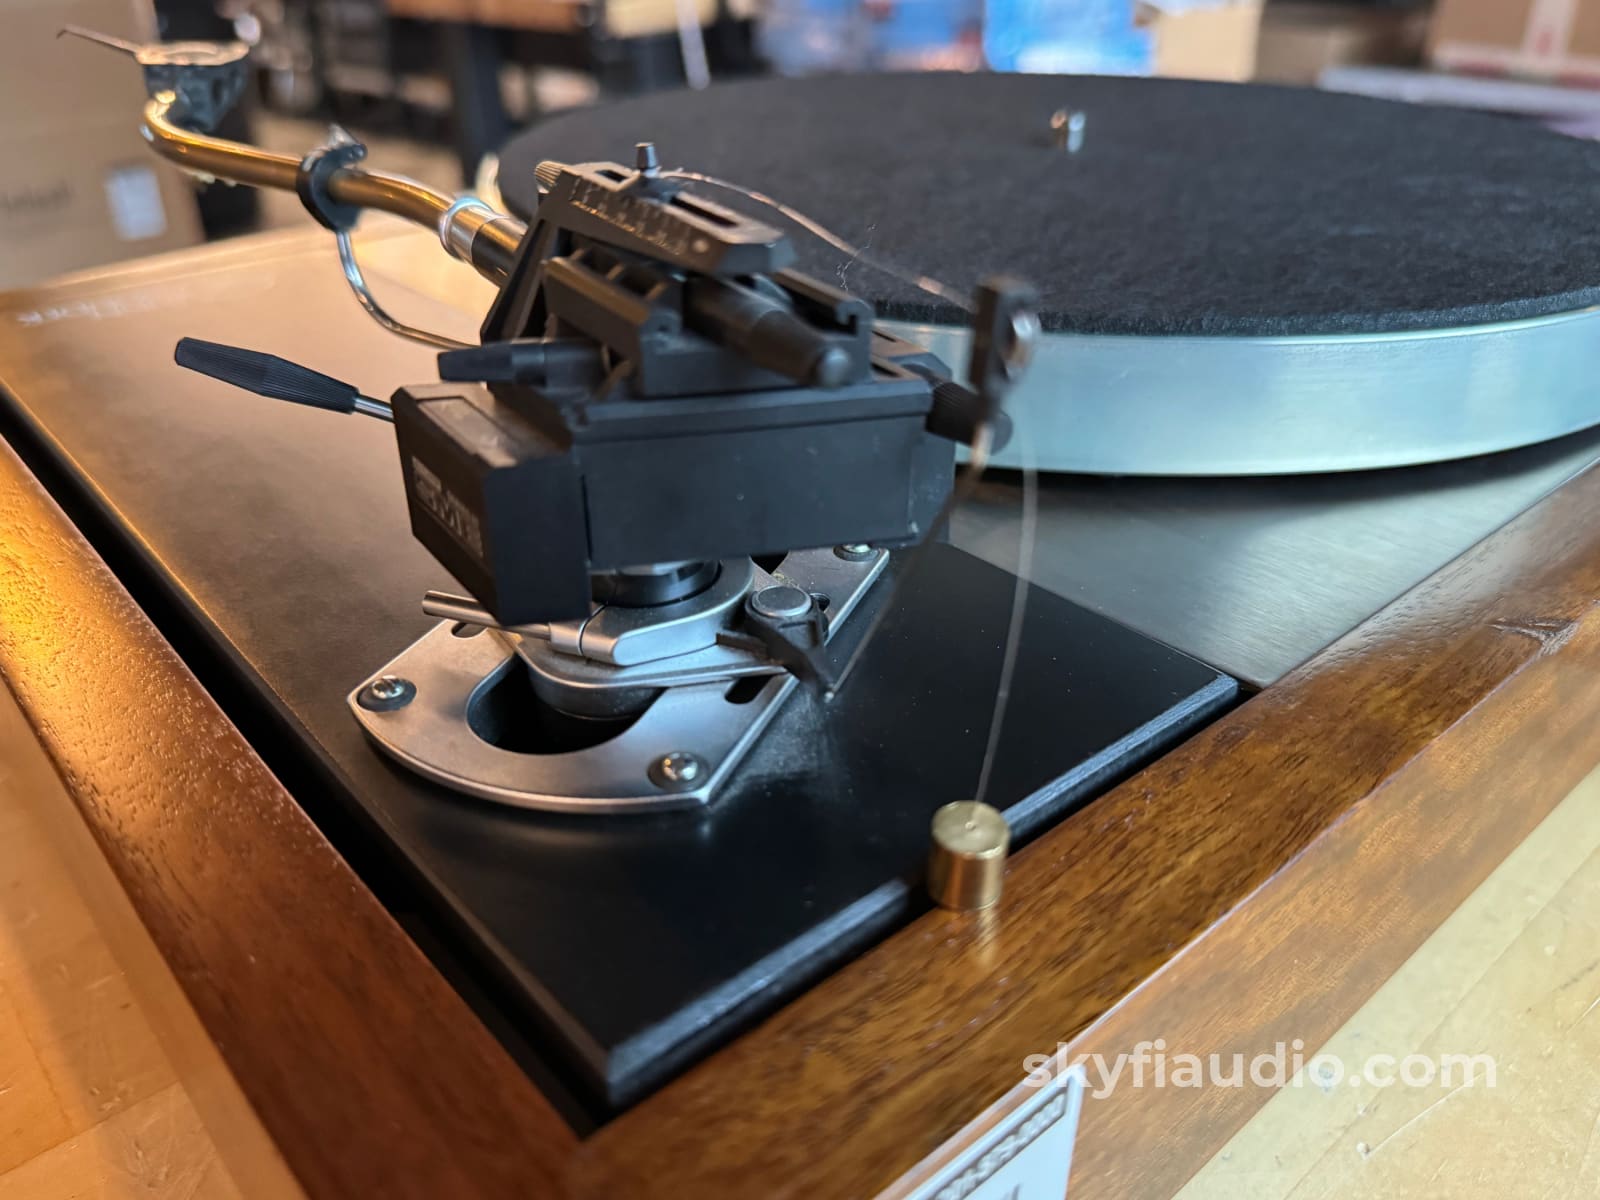 Linn Lp12 Vintage Turntable With Upgrades And Sme Tonearm